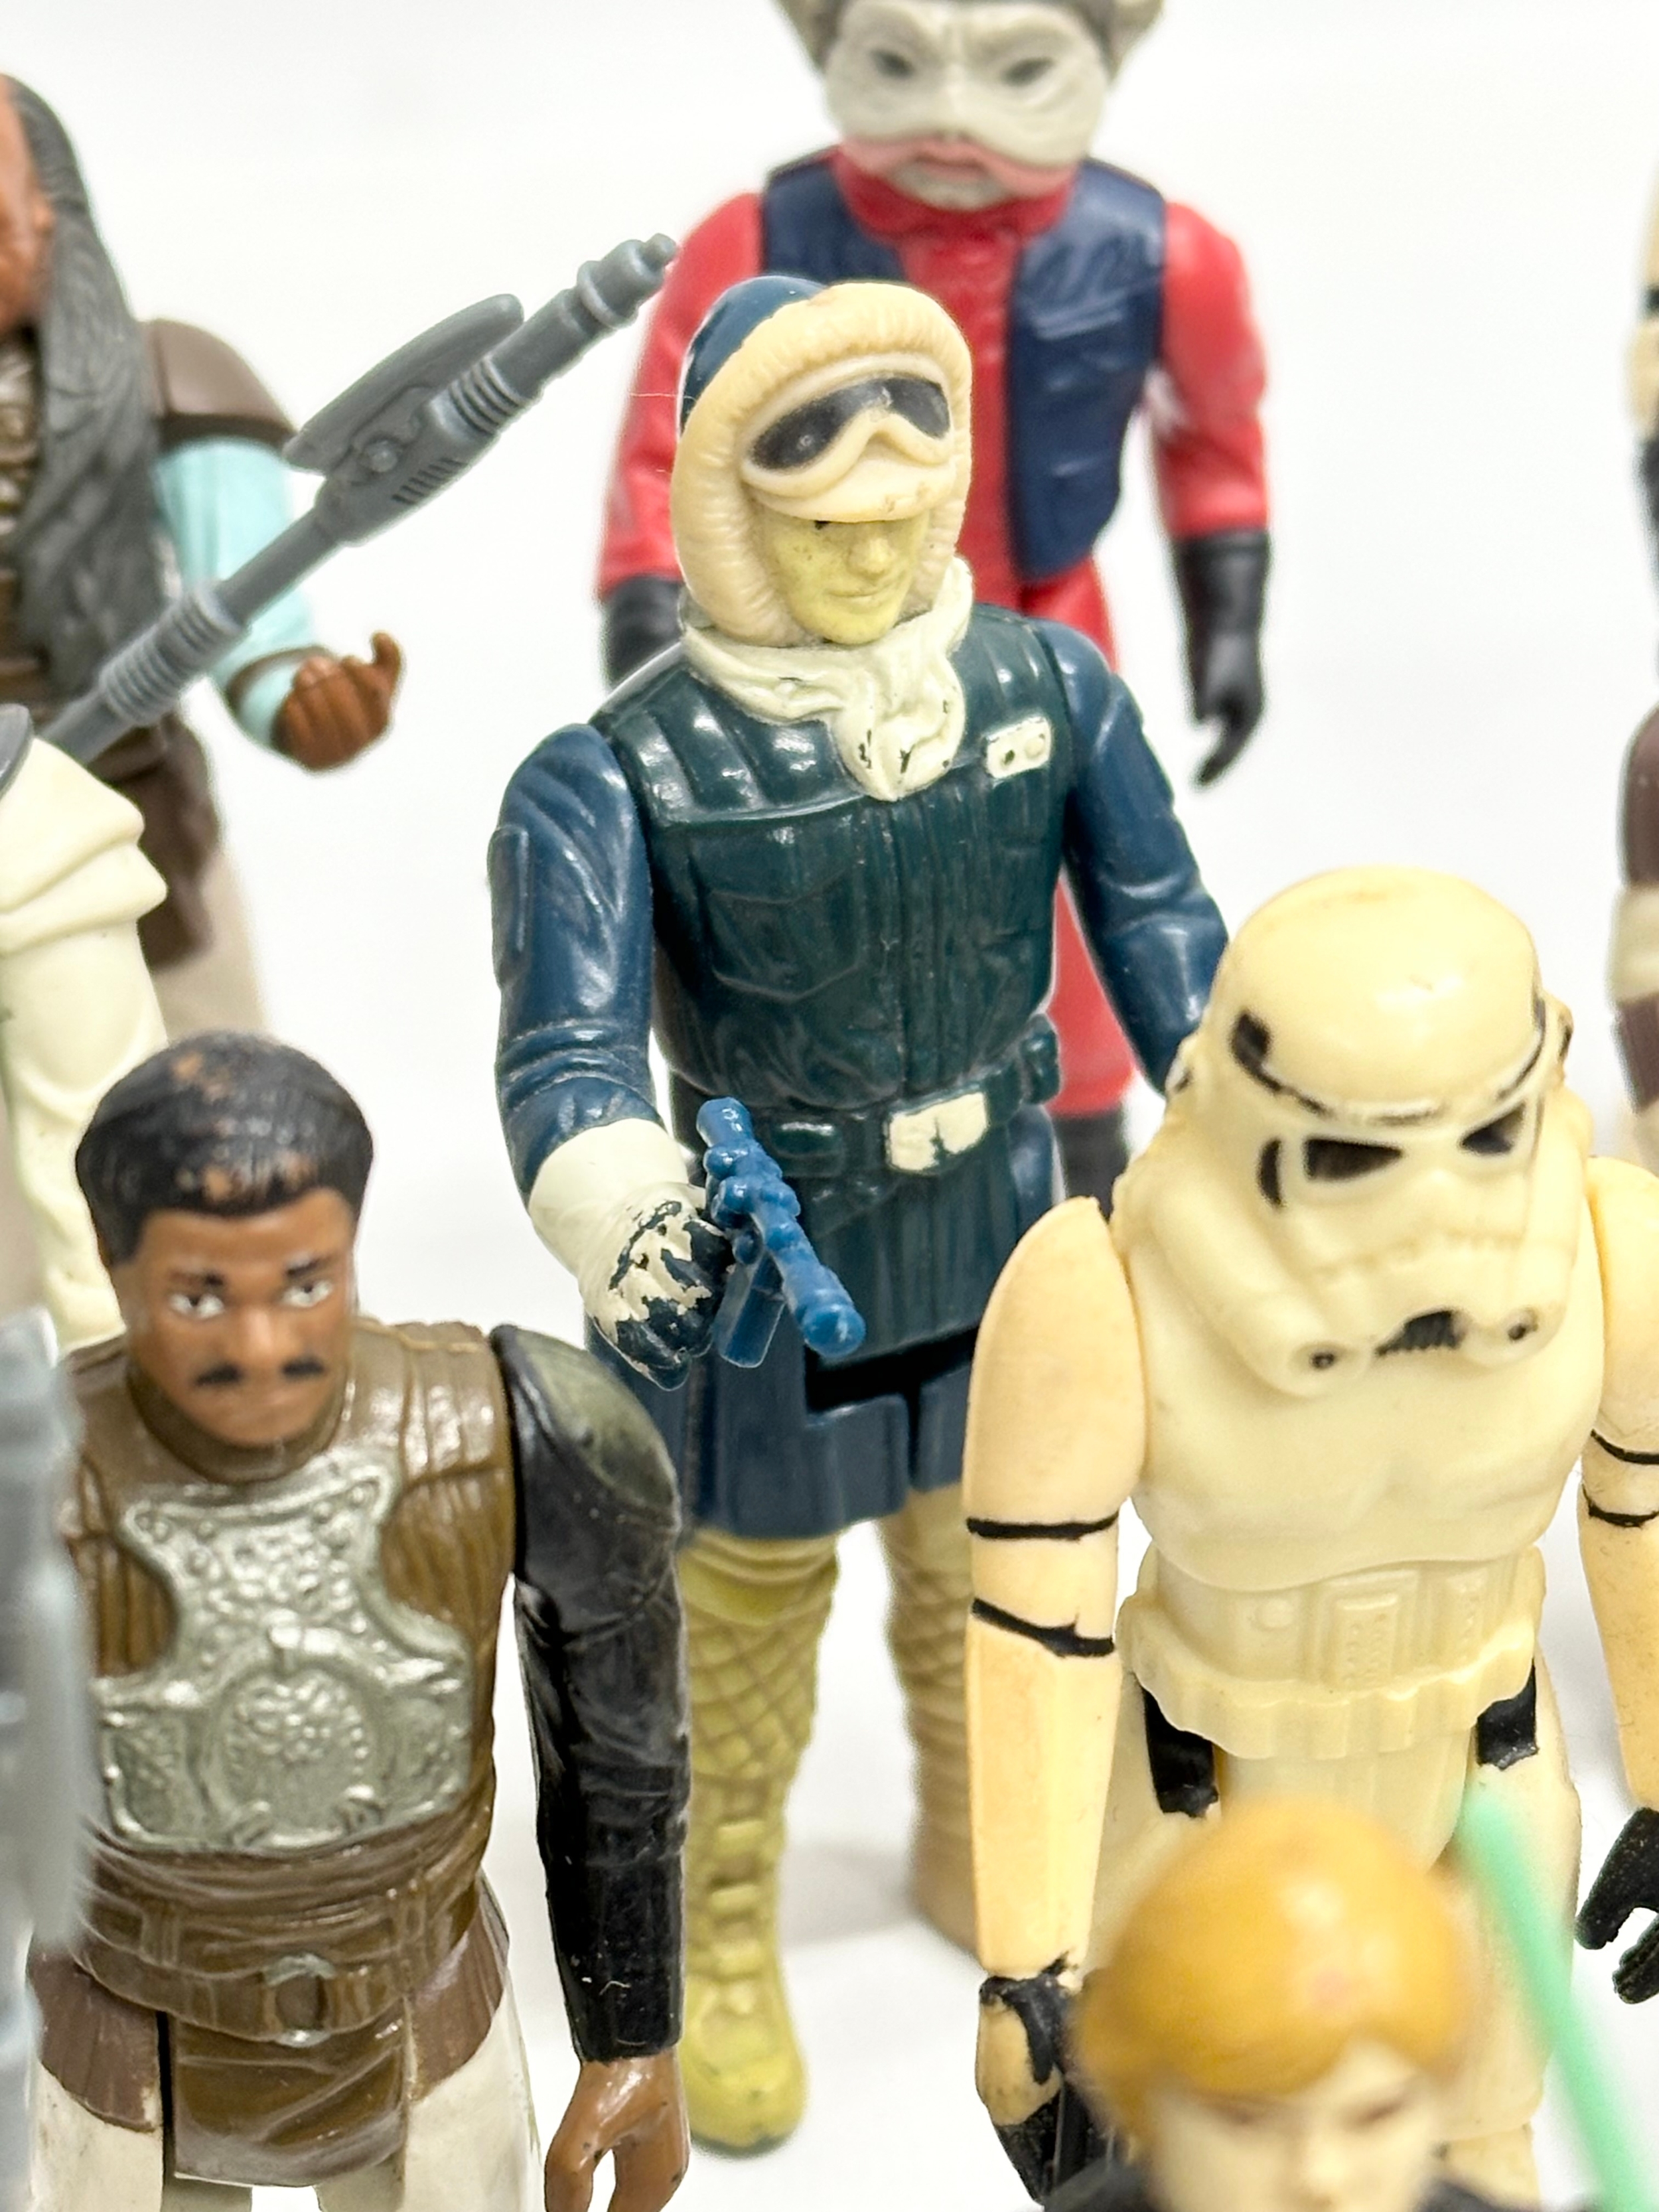 A collection of 1970’s/80’s Star Wars action figures and weapons. - Image 20 of 24